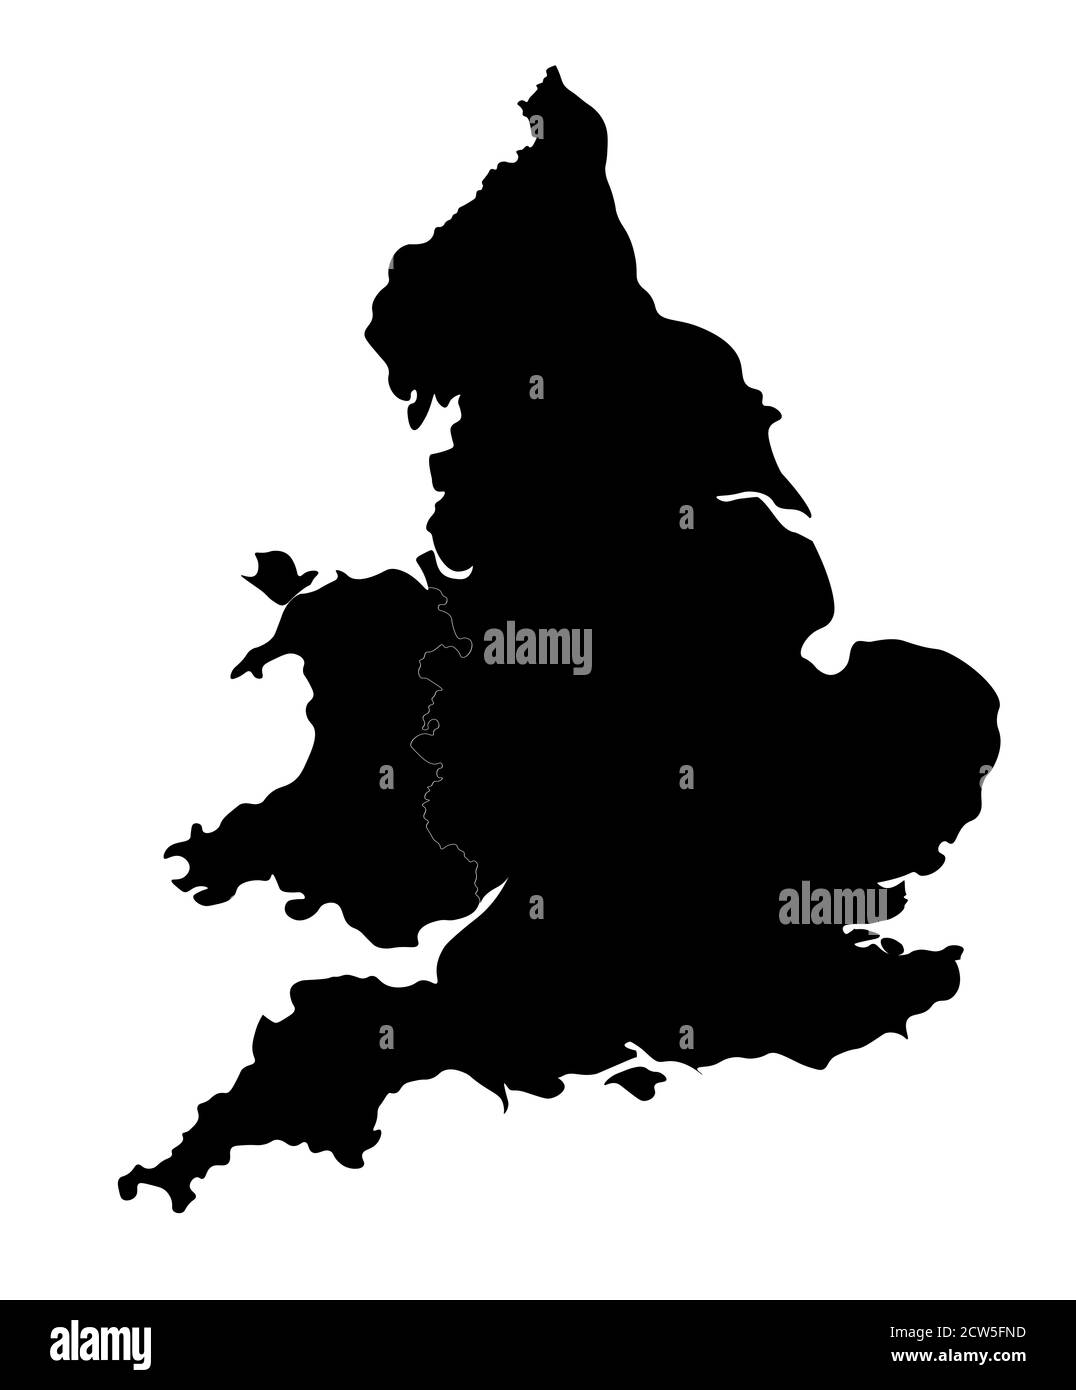 England and Wales silhouette. Nicely shaped map with rounded edges for elegant look. Stock Photo